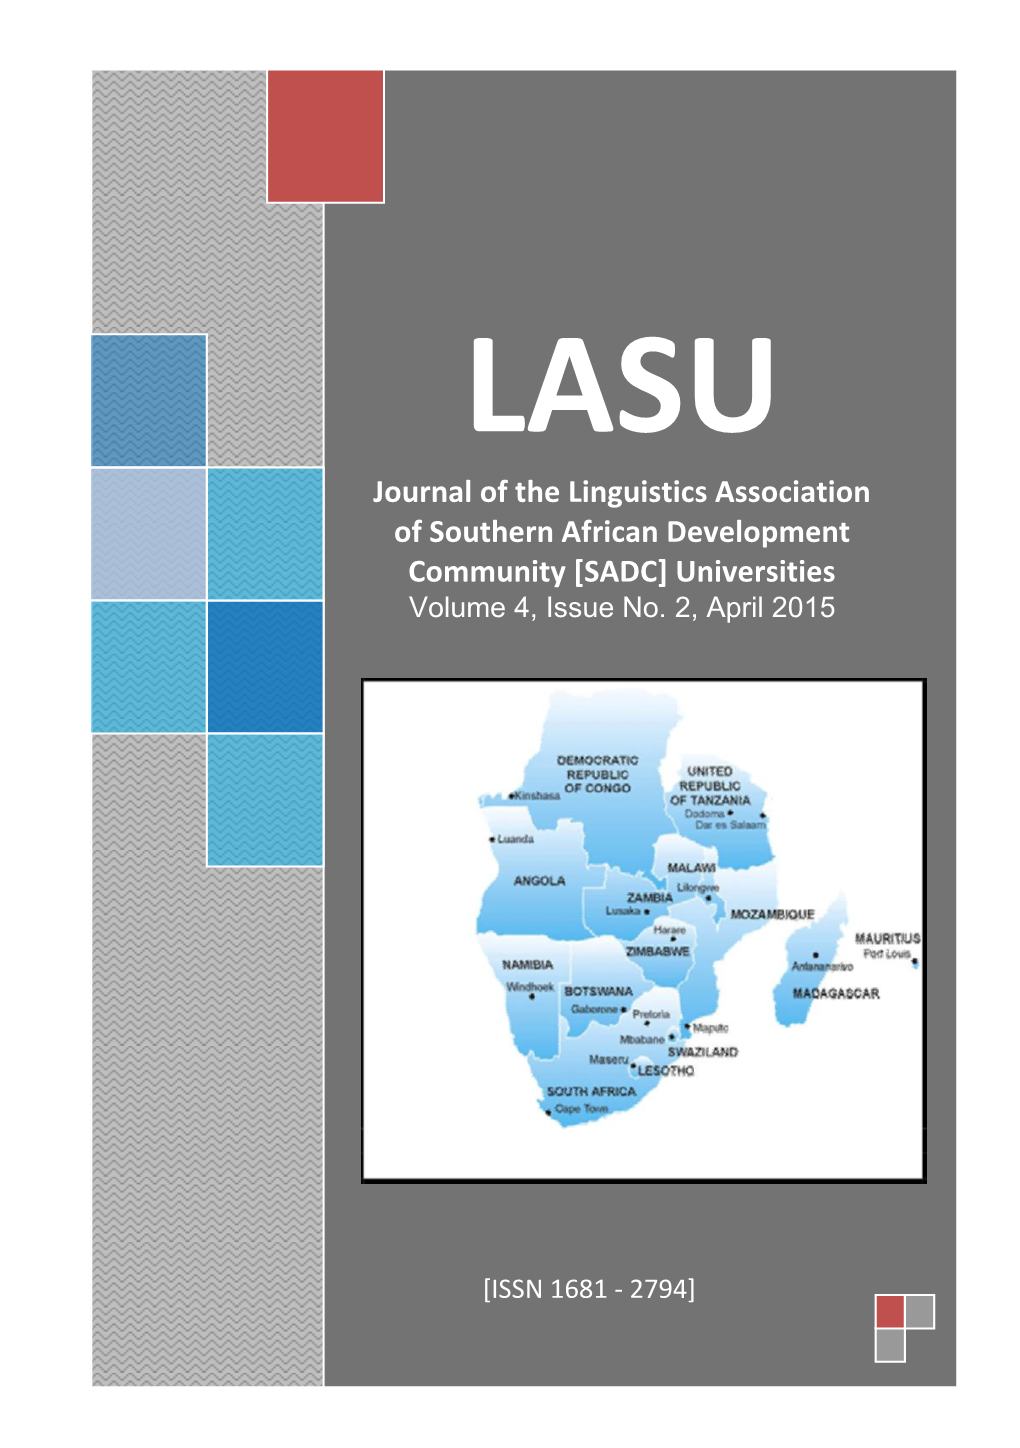 Journal of the Linguistics Association of Southern African Development Community [SADC] Universities Volume 4, Issue No